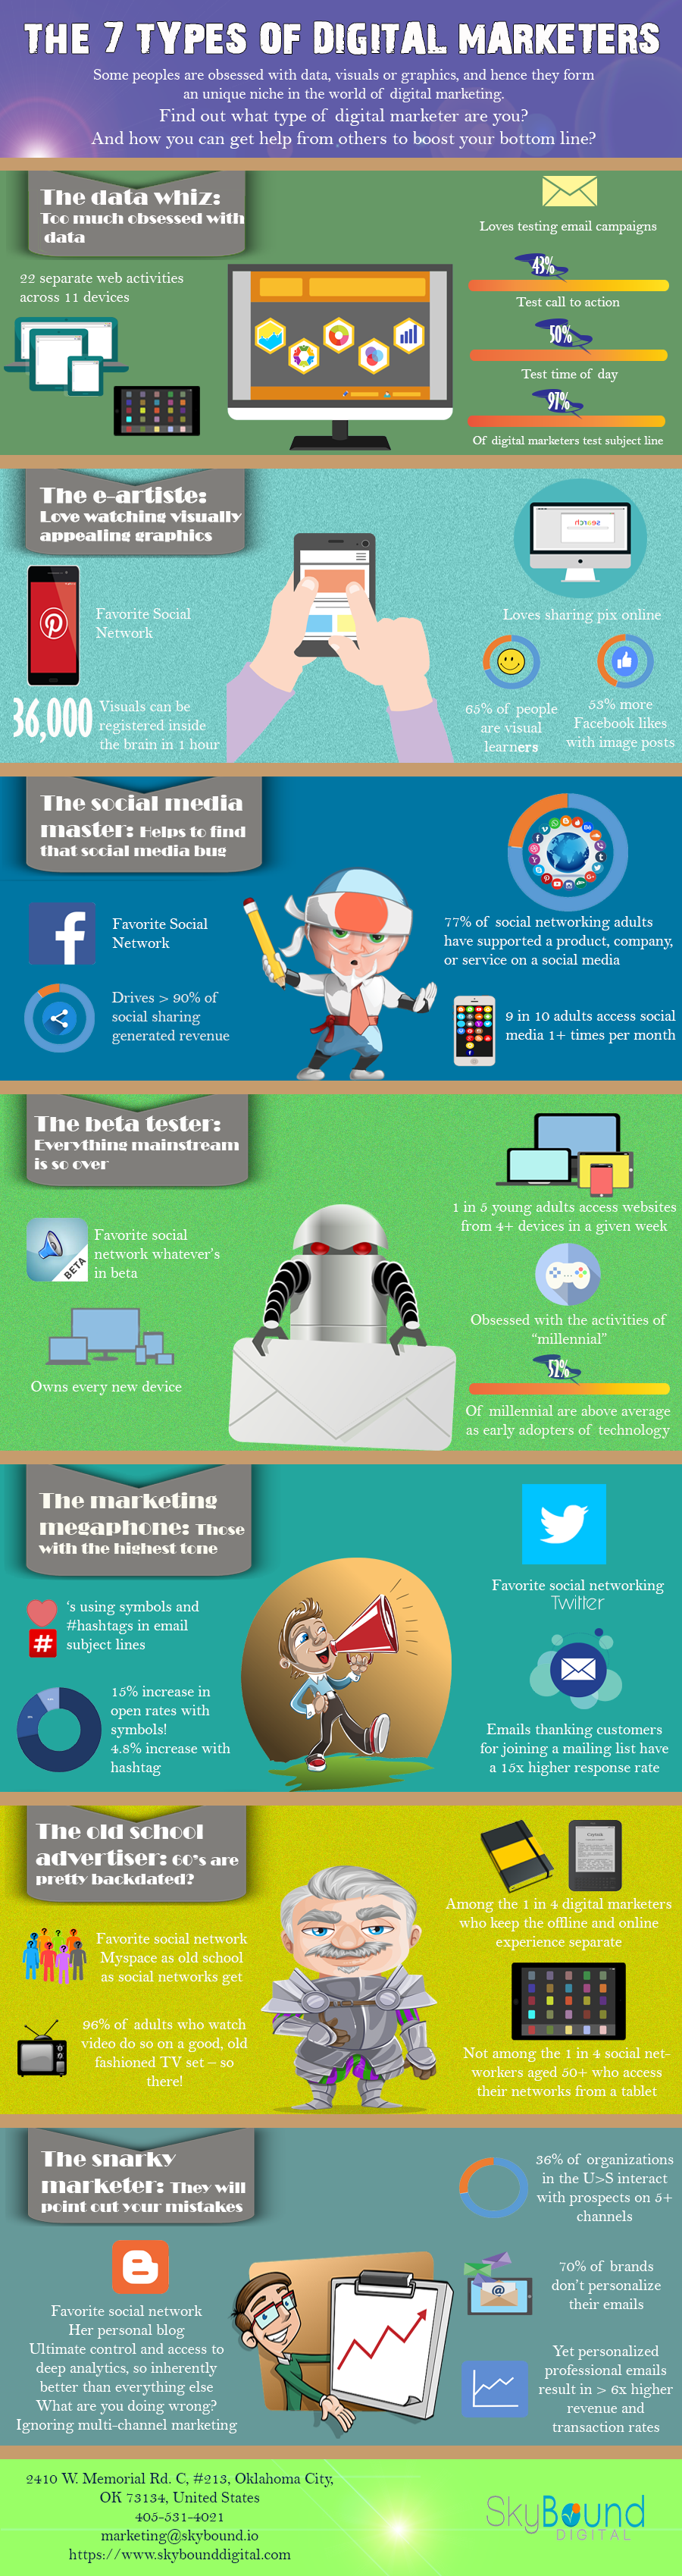 Types of Digital Marketers Infographic